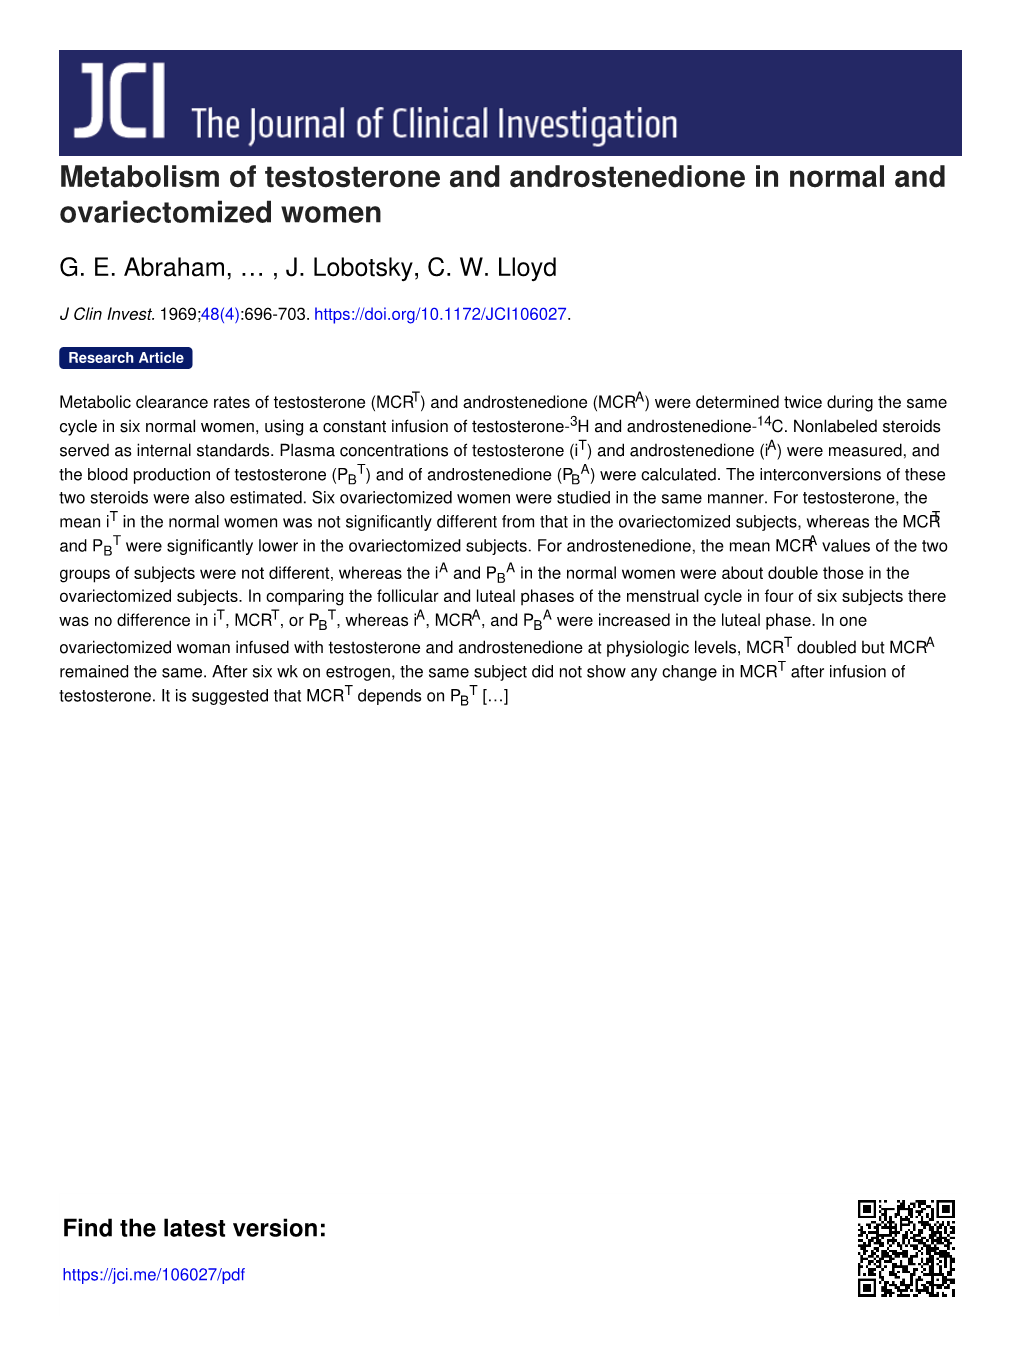 Metabolism of Testosterone and Androstenedione in Normal and Ovariectomized Women